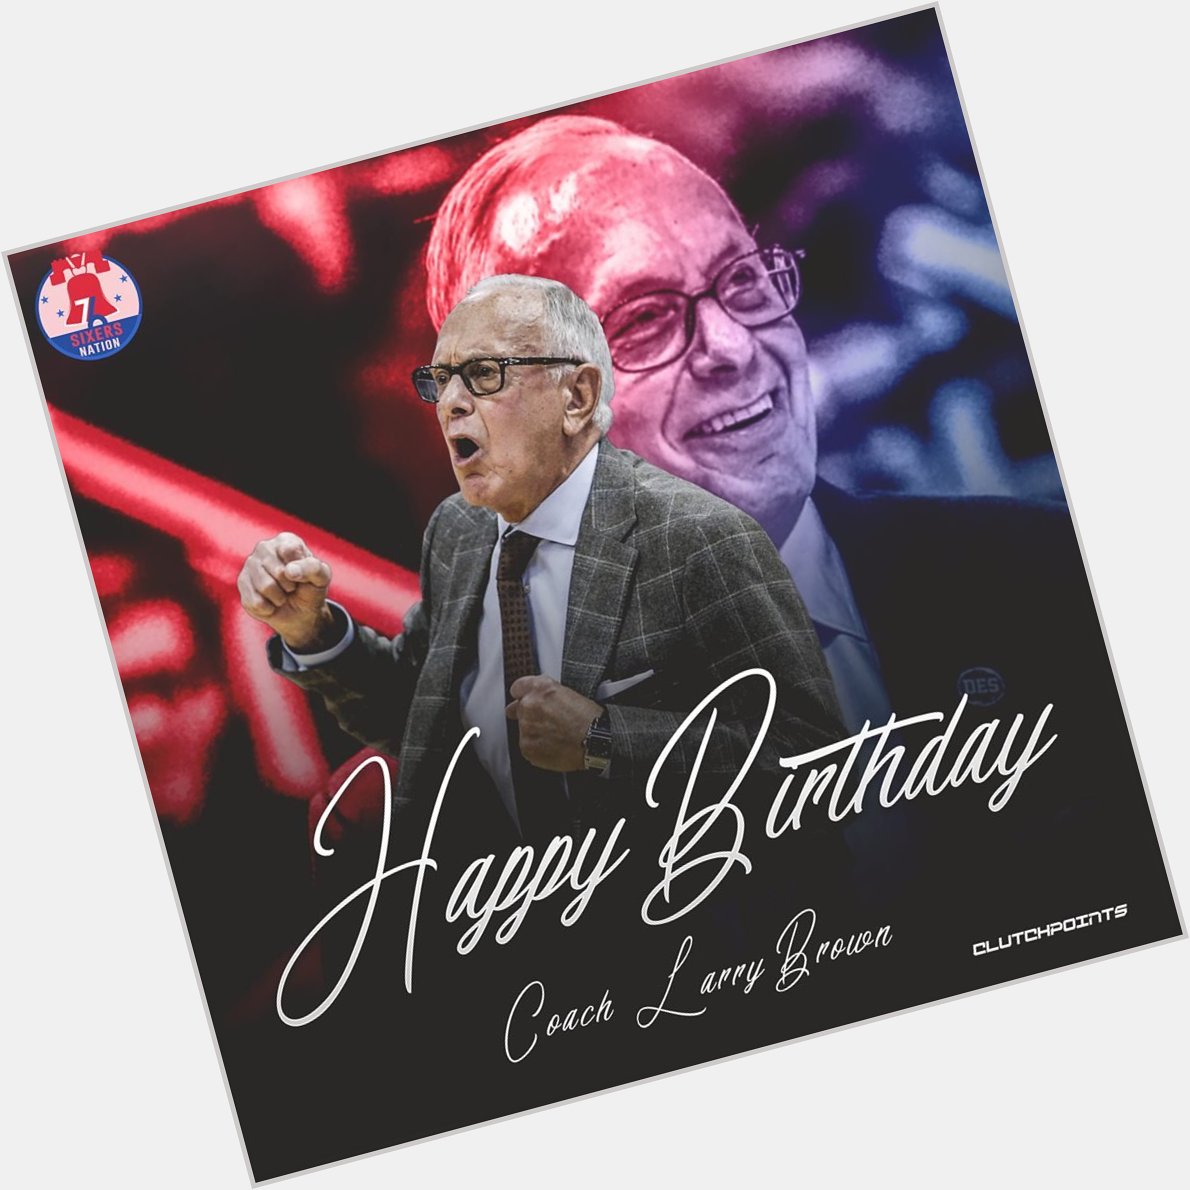 Happy 79th birthday coach Larry Brown!  